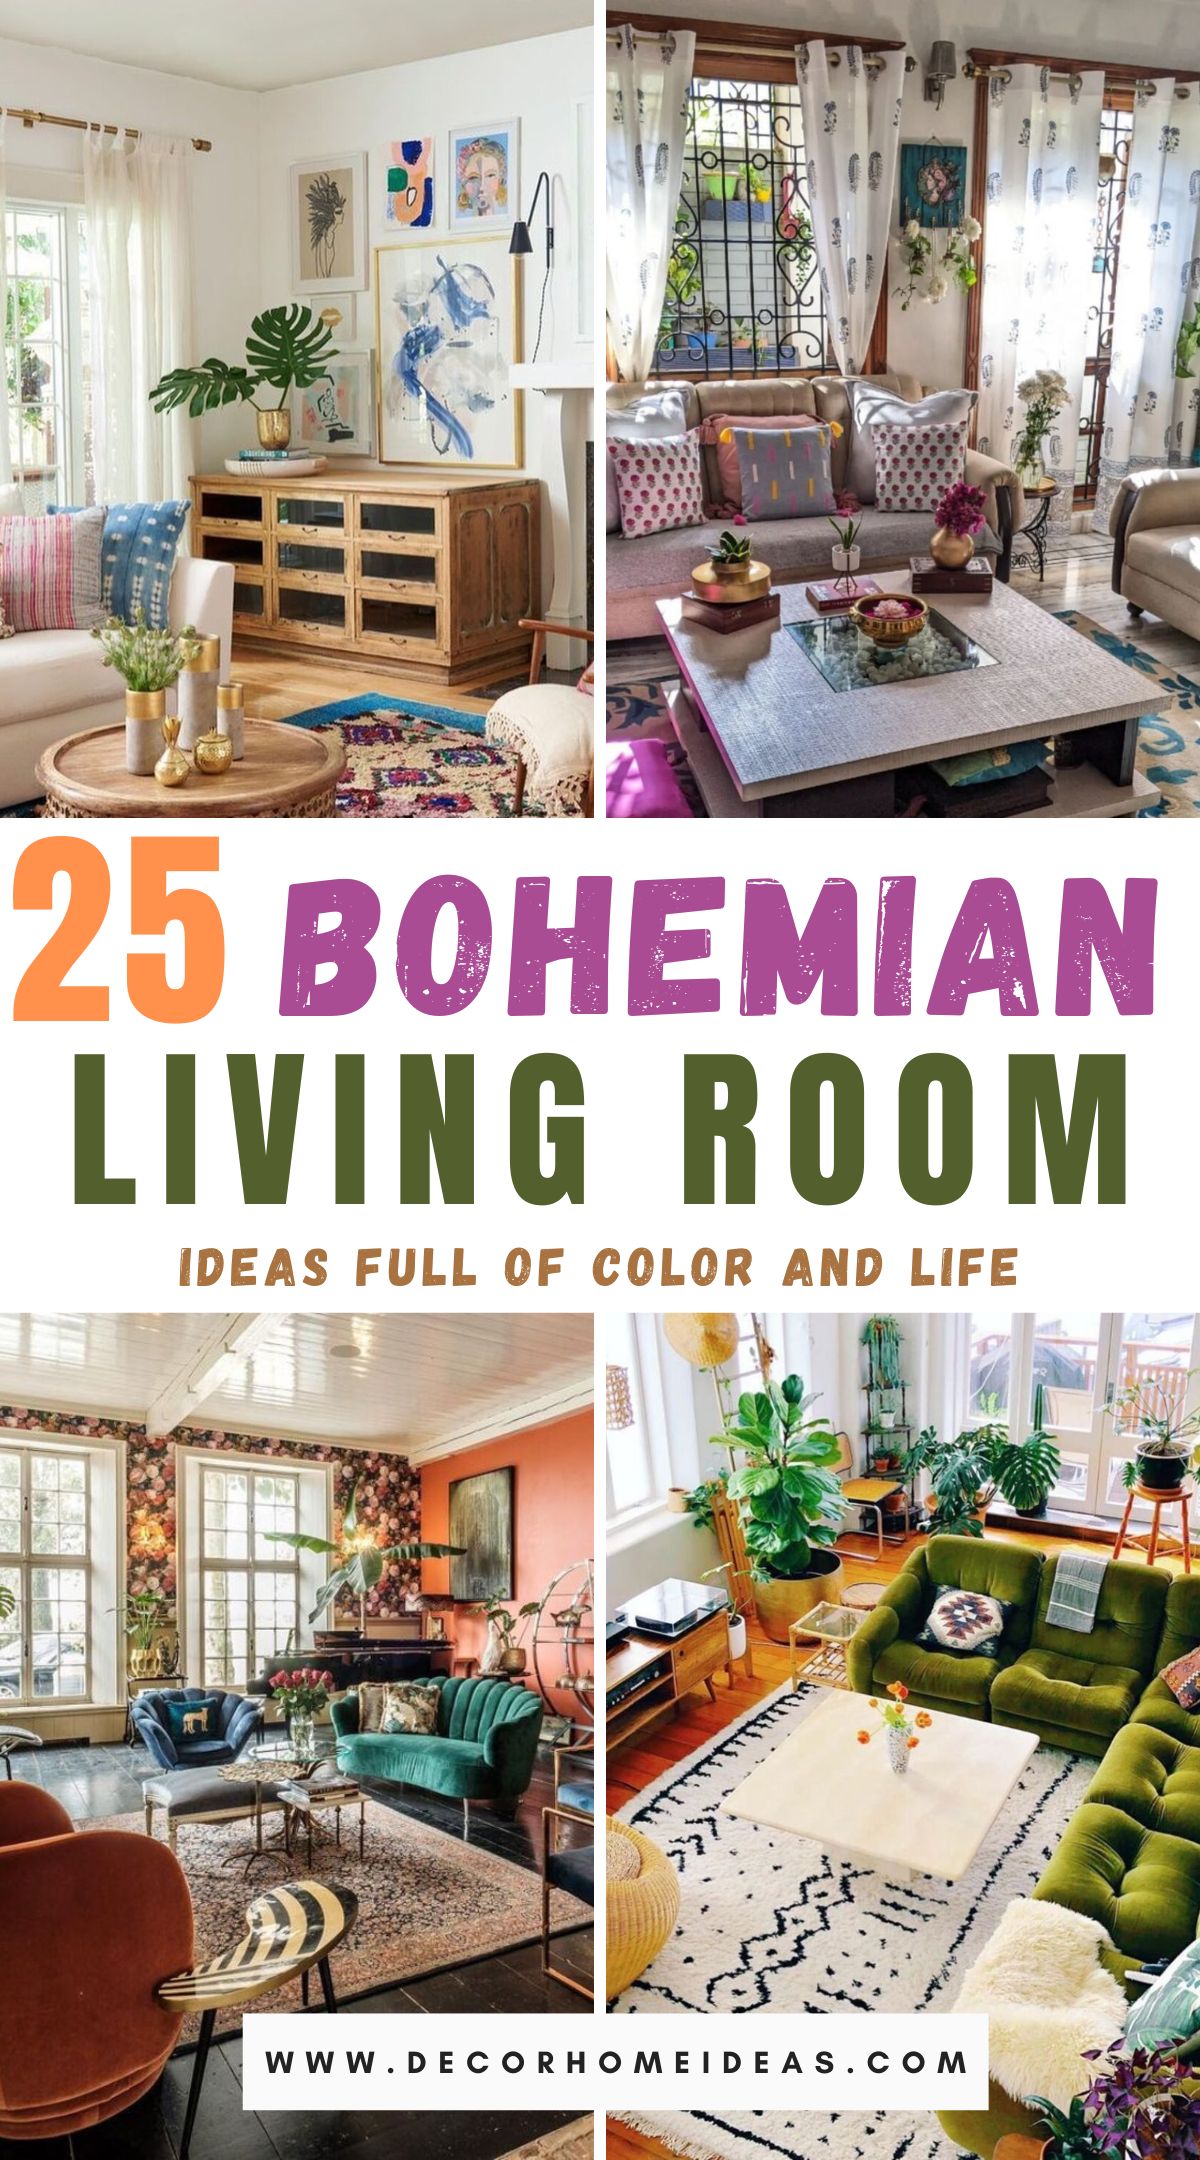 Infuse color and life into your living room with these 25 bohemian ideas. From vibrant textiles to eclectic decor, explore creative inspirations that capture the free-spirited essence of bohemian style.